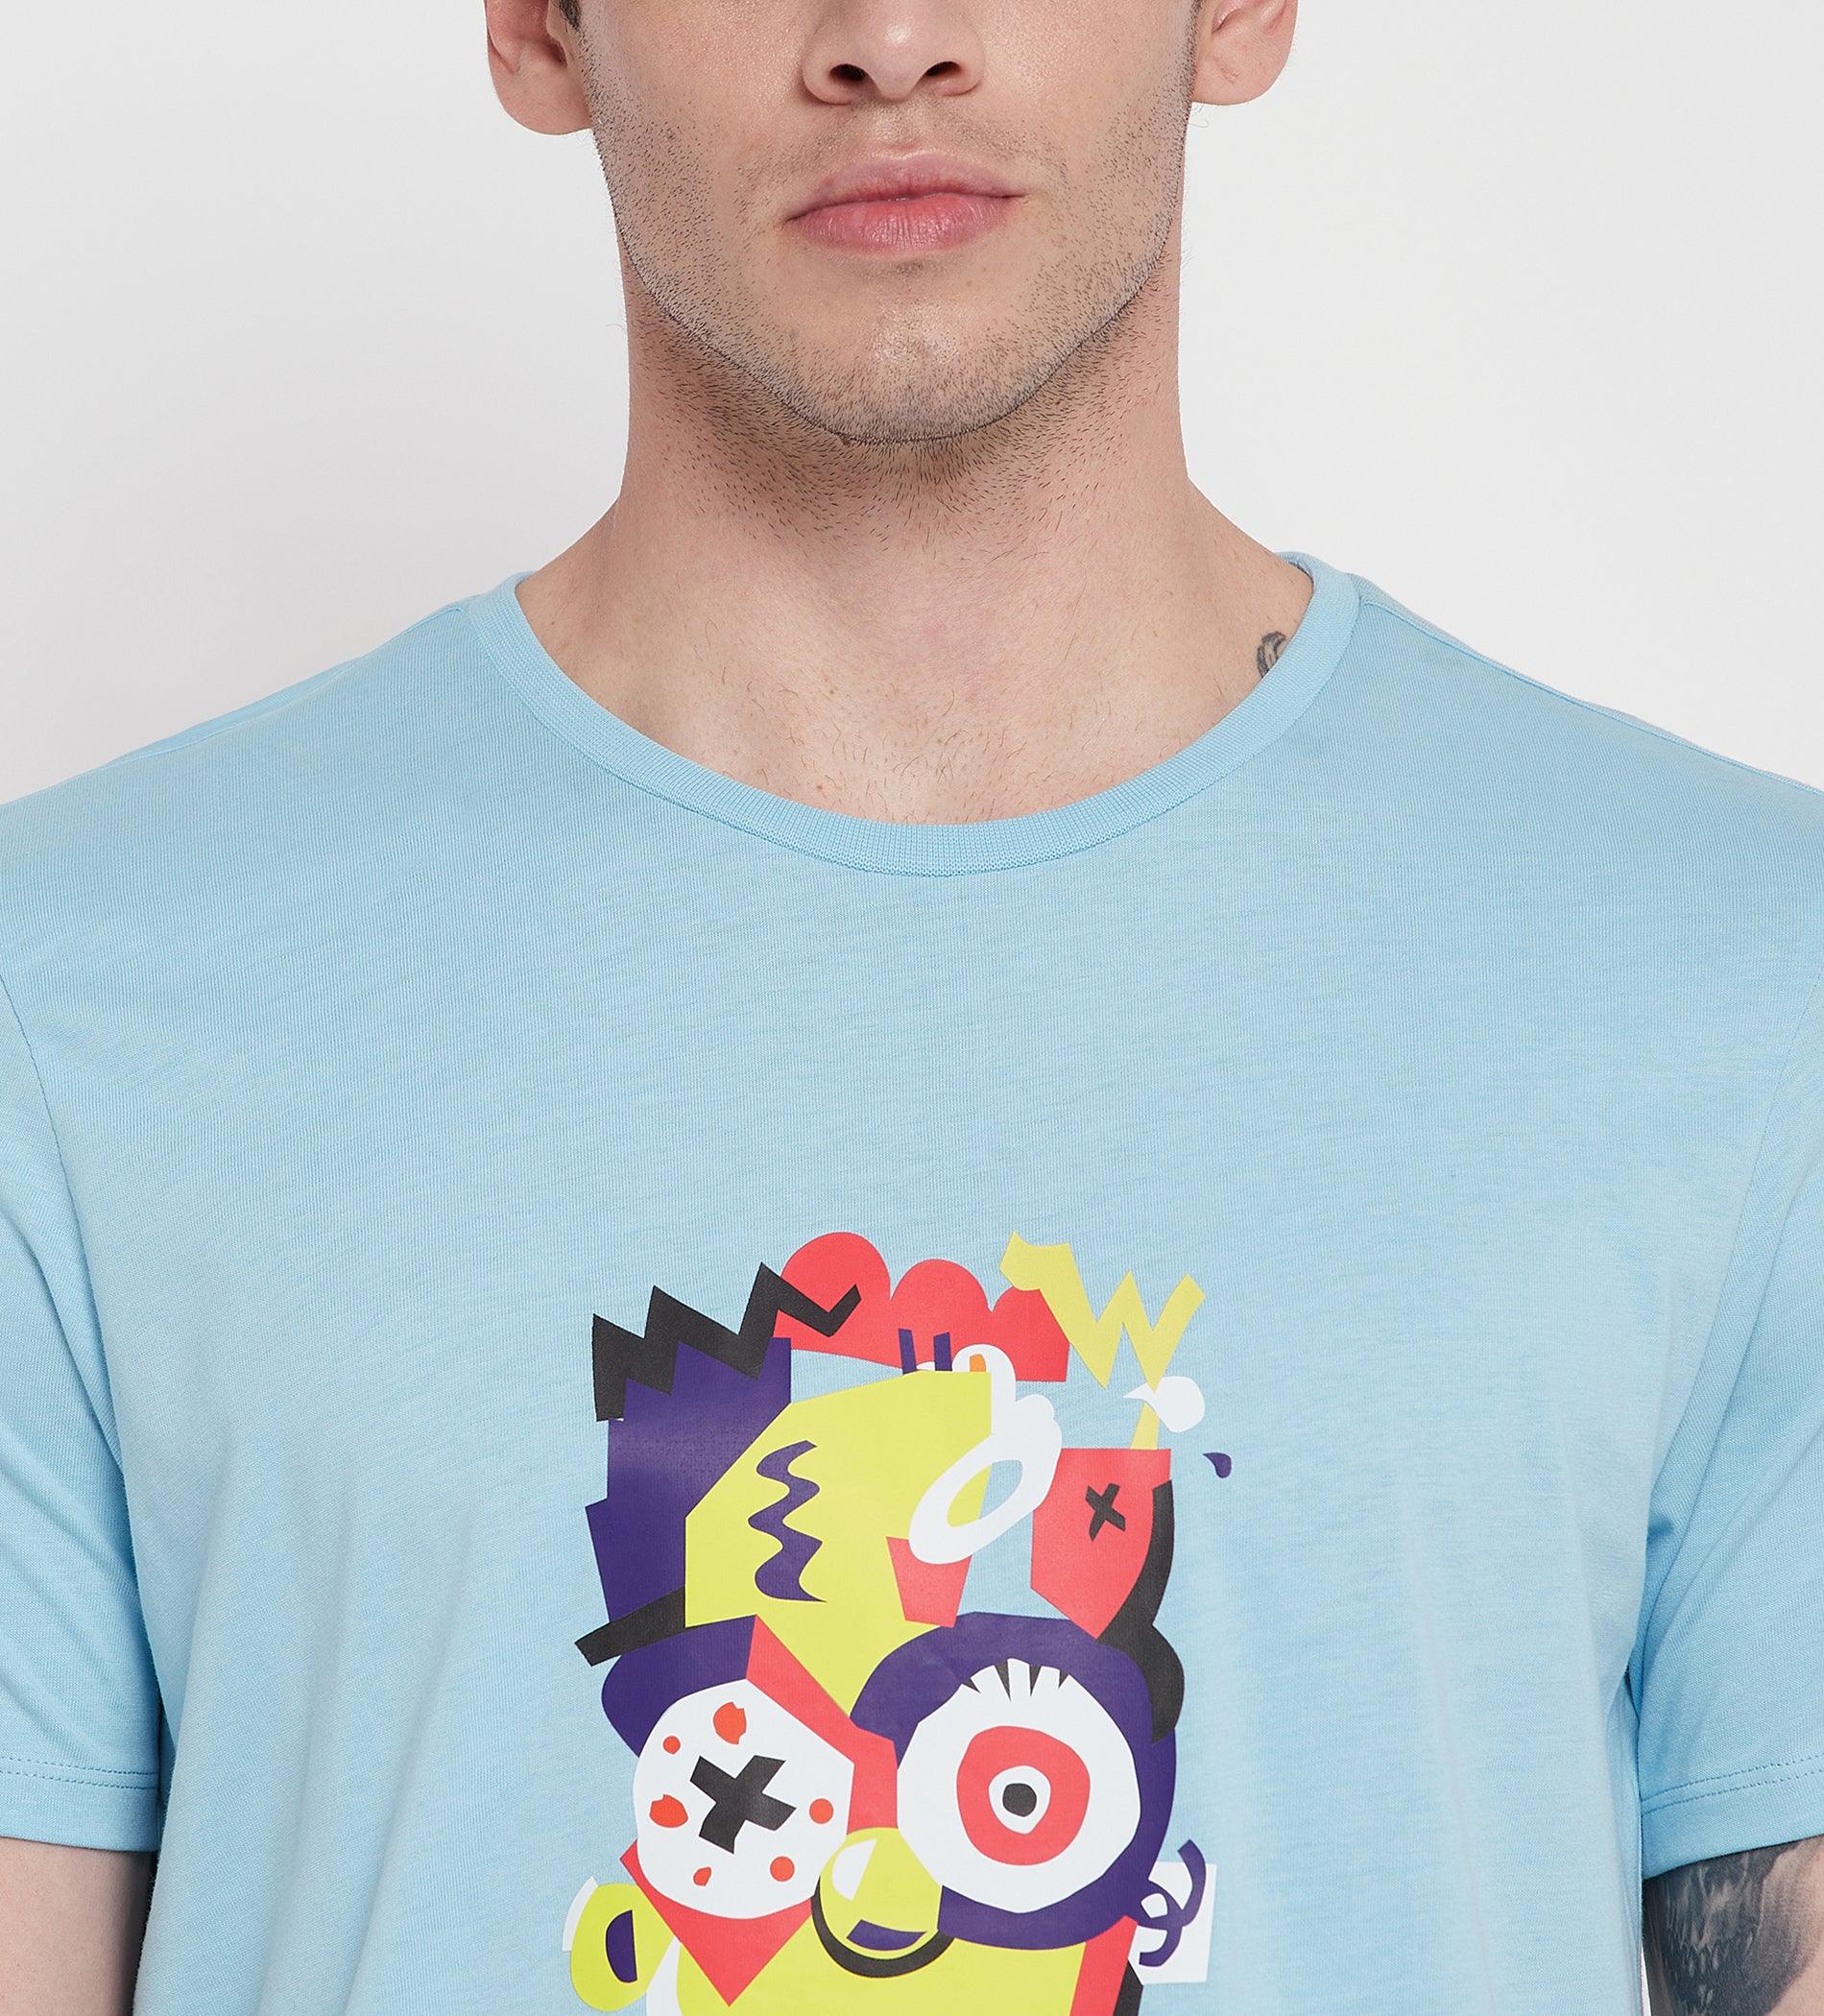 Sky Blue Perfectly Imperfect Regular T-shirt for Men